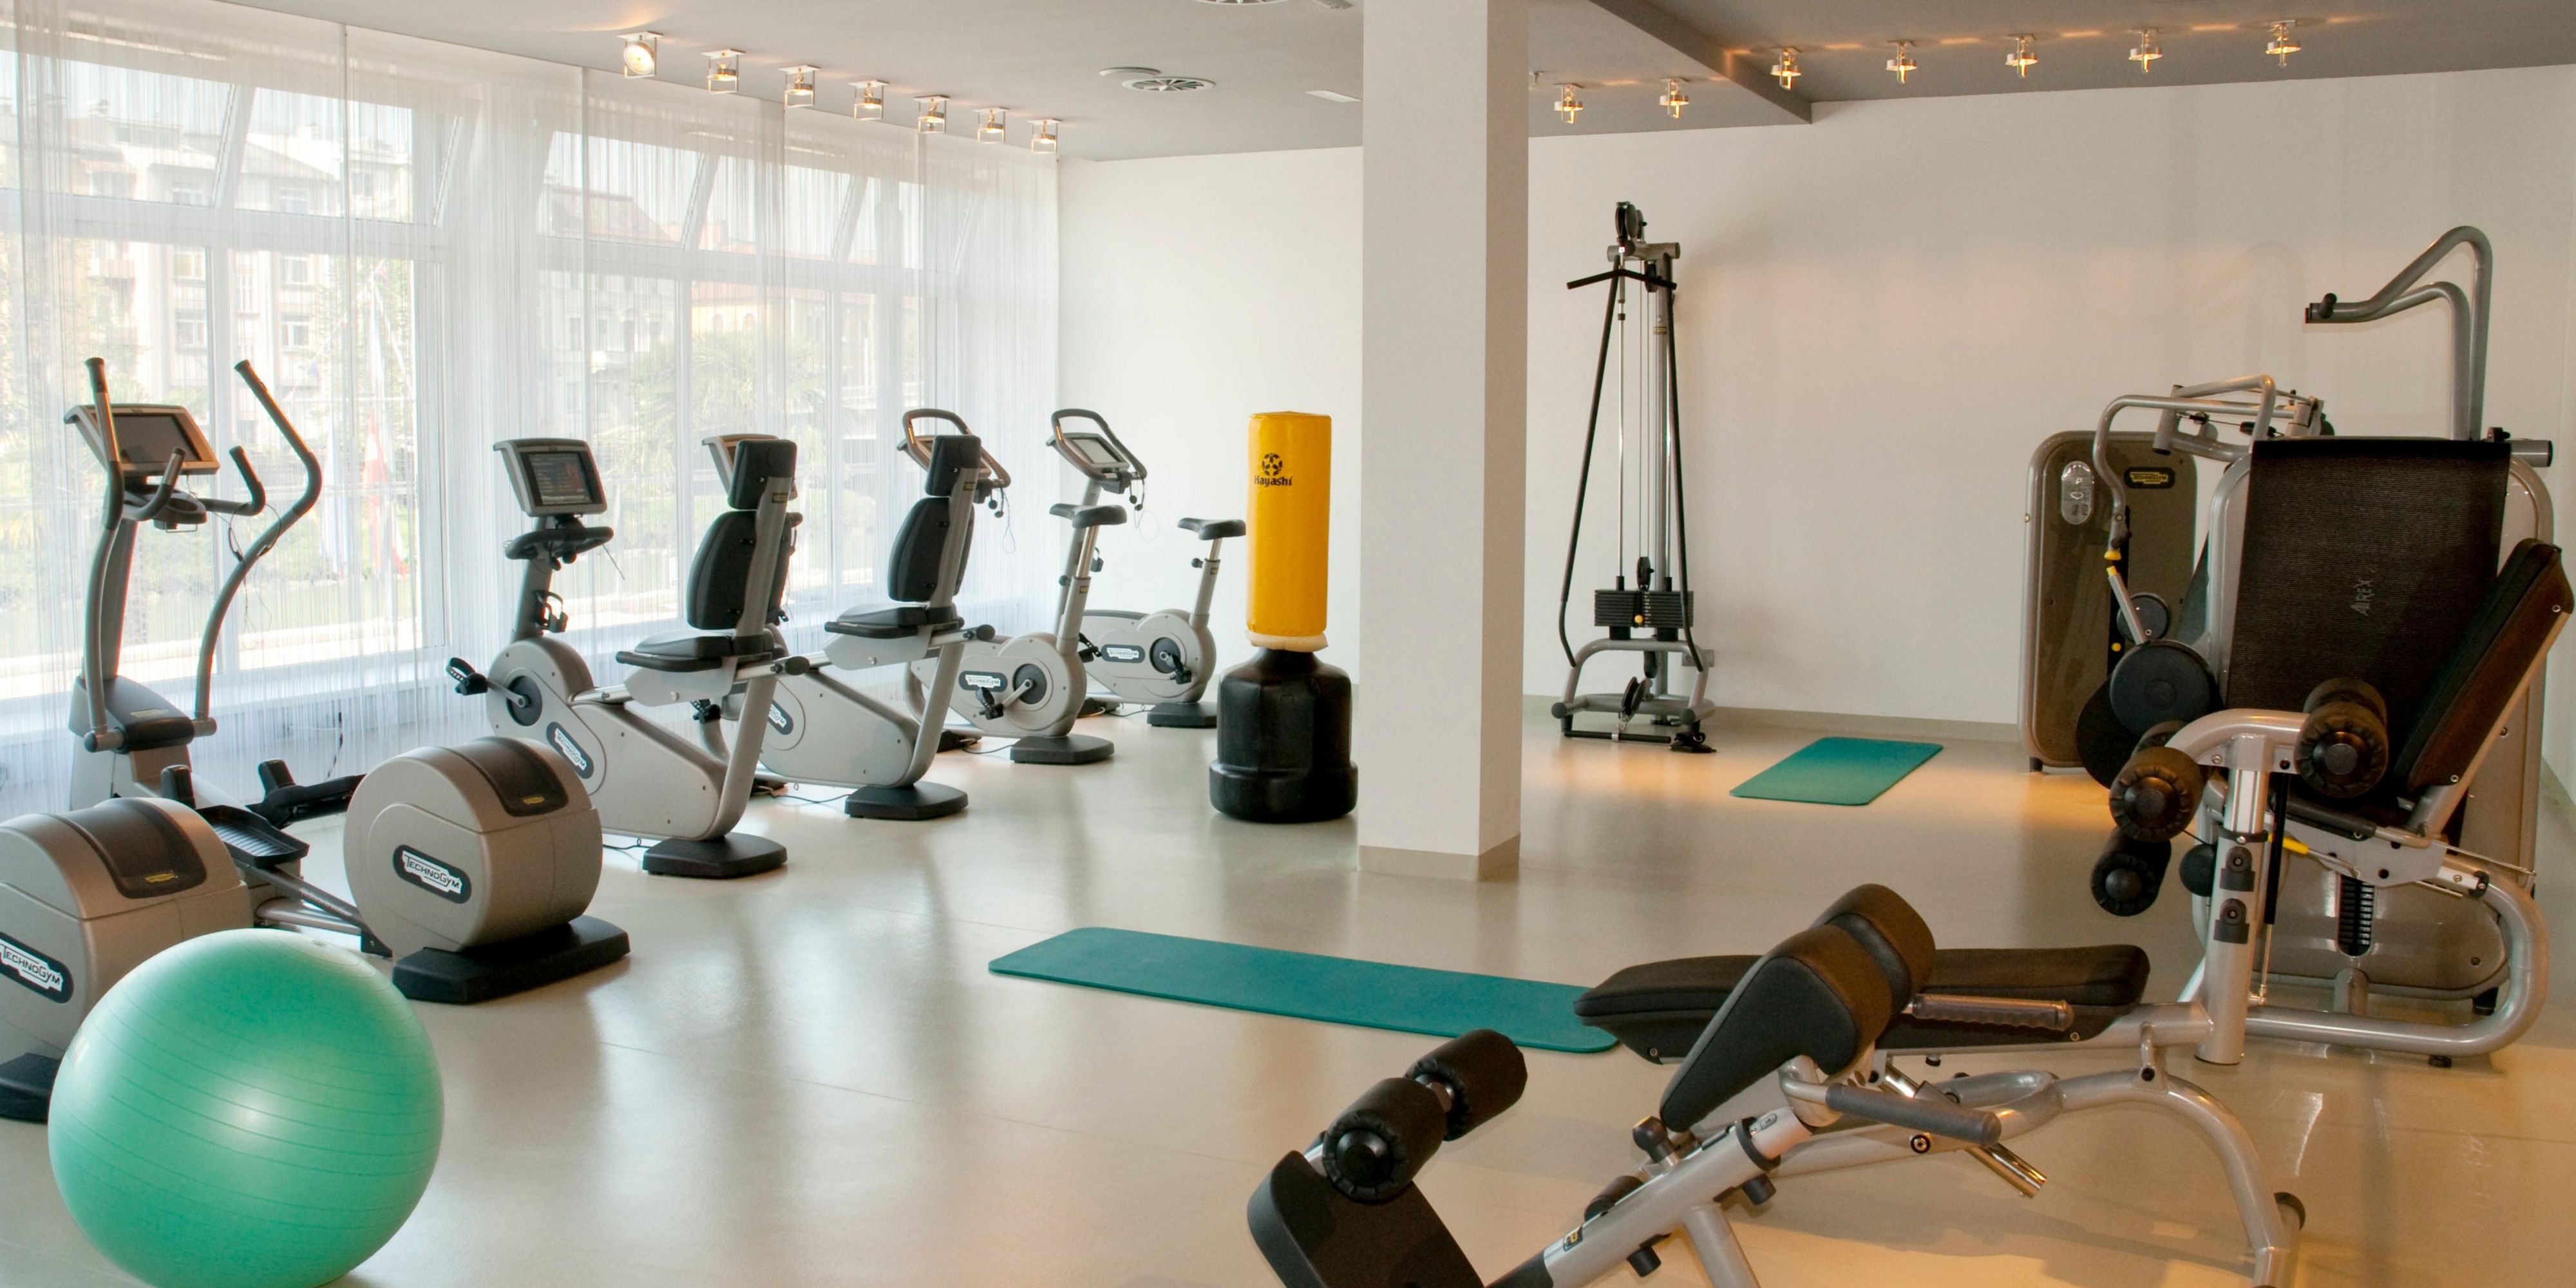 In our spacious fitness room covering 800 exclusive square metres, you will find everything you need for a balanced workout. State-of-the-art equipment from leading manufacturers is available to help you achieve your fitness goals, be it strength building, endurance training or targeted body toning. The room is designed so that both beginners